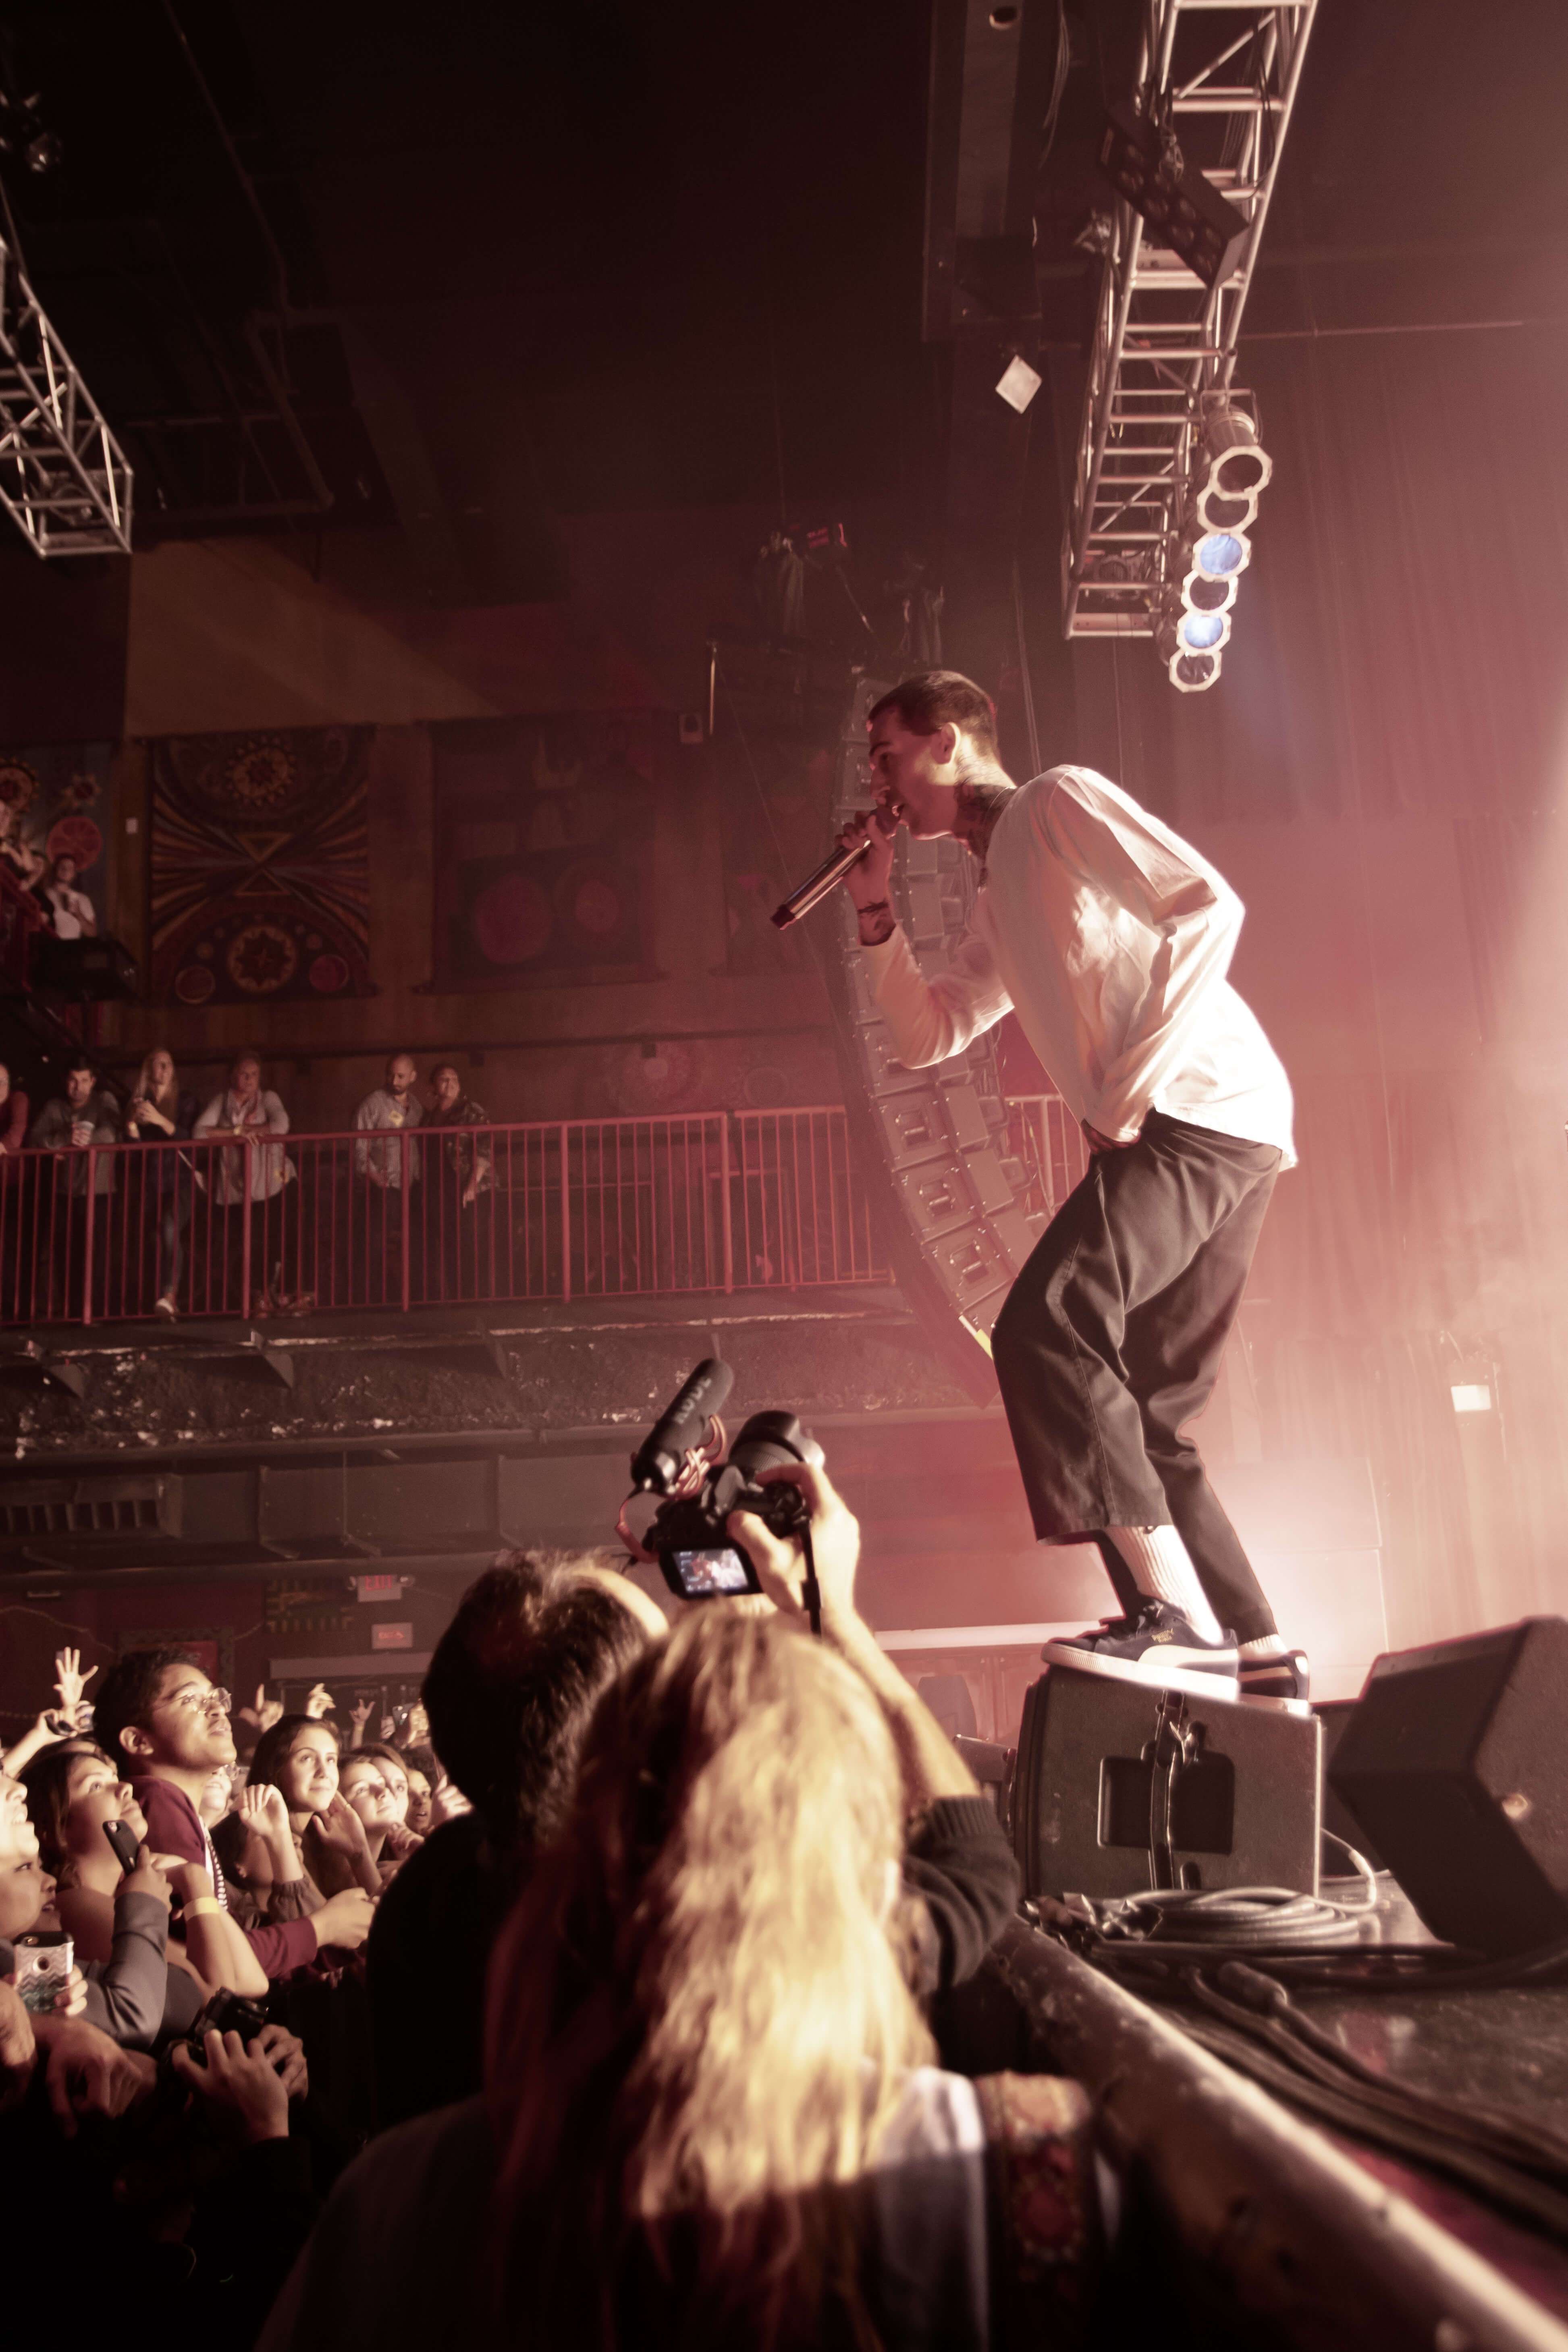 PHOTO GALLERY: The Neighbourhood at Boston’s House of Blues